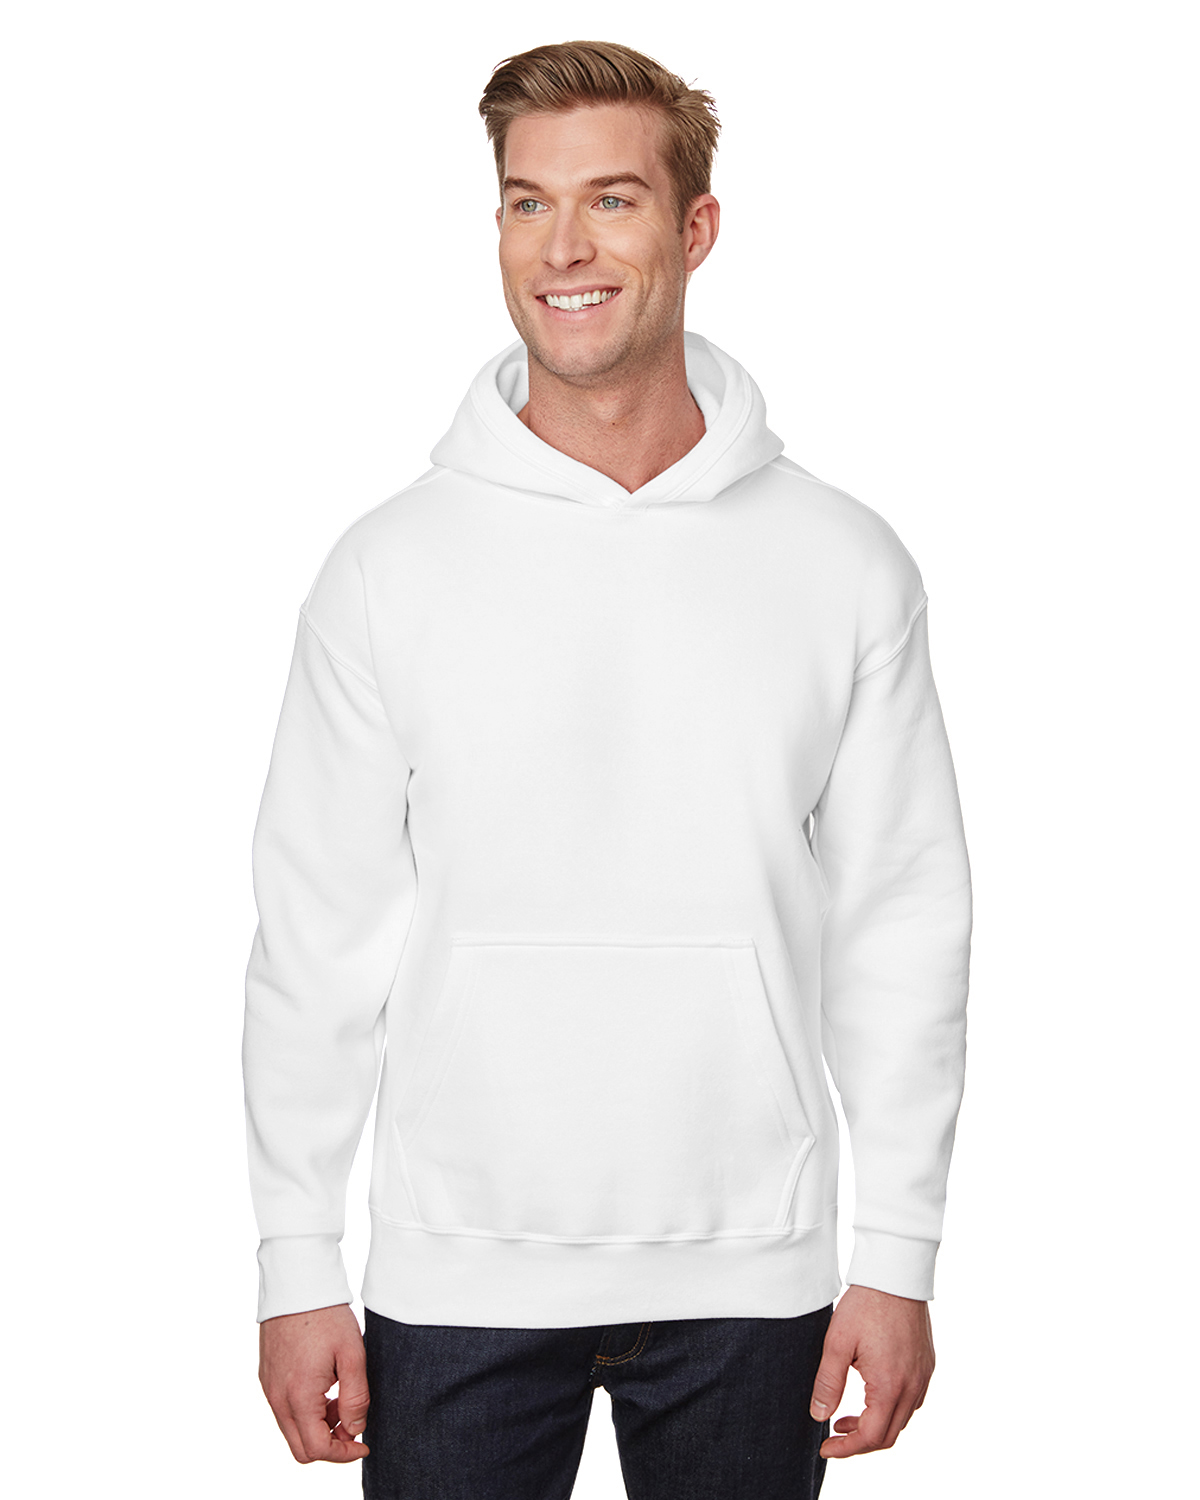  MUXIDISA N-B-A Yougboy Hoodie Men'S Hooded Sweatshirts 3d Print  Nice Sweat Shirt And Pullover Hoodies For Men Loose Long Sleeve Tops Sport  Outwear Small White : Clothing, Shoes & Jewelry